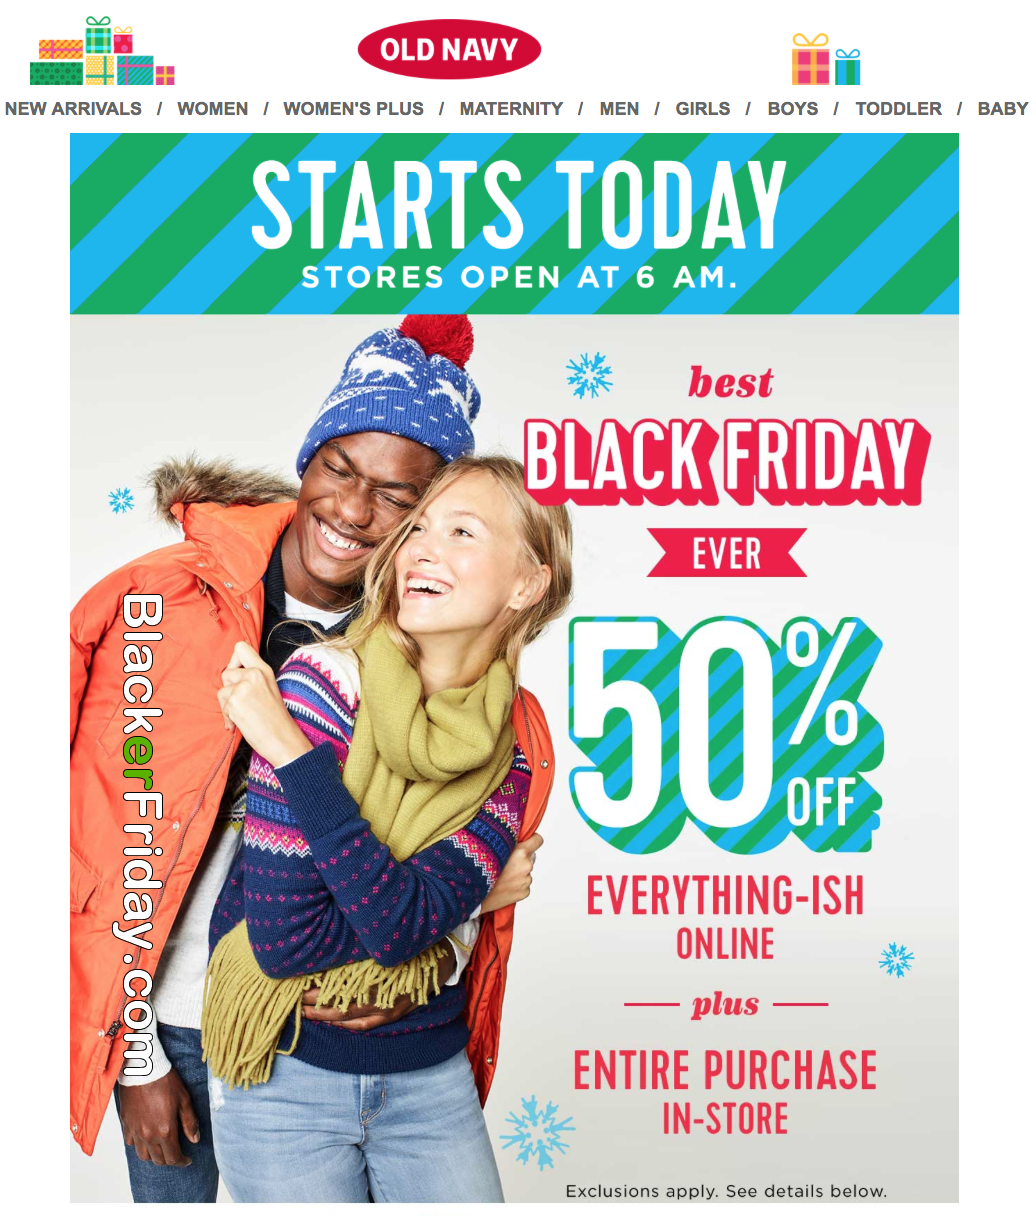 Old Navy Black Friday 2021 Sale - What to Expect - Blacker Friday